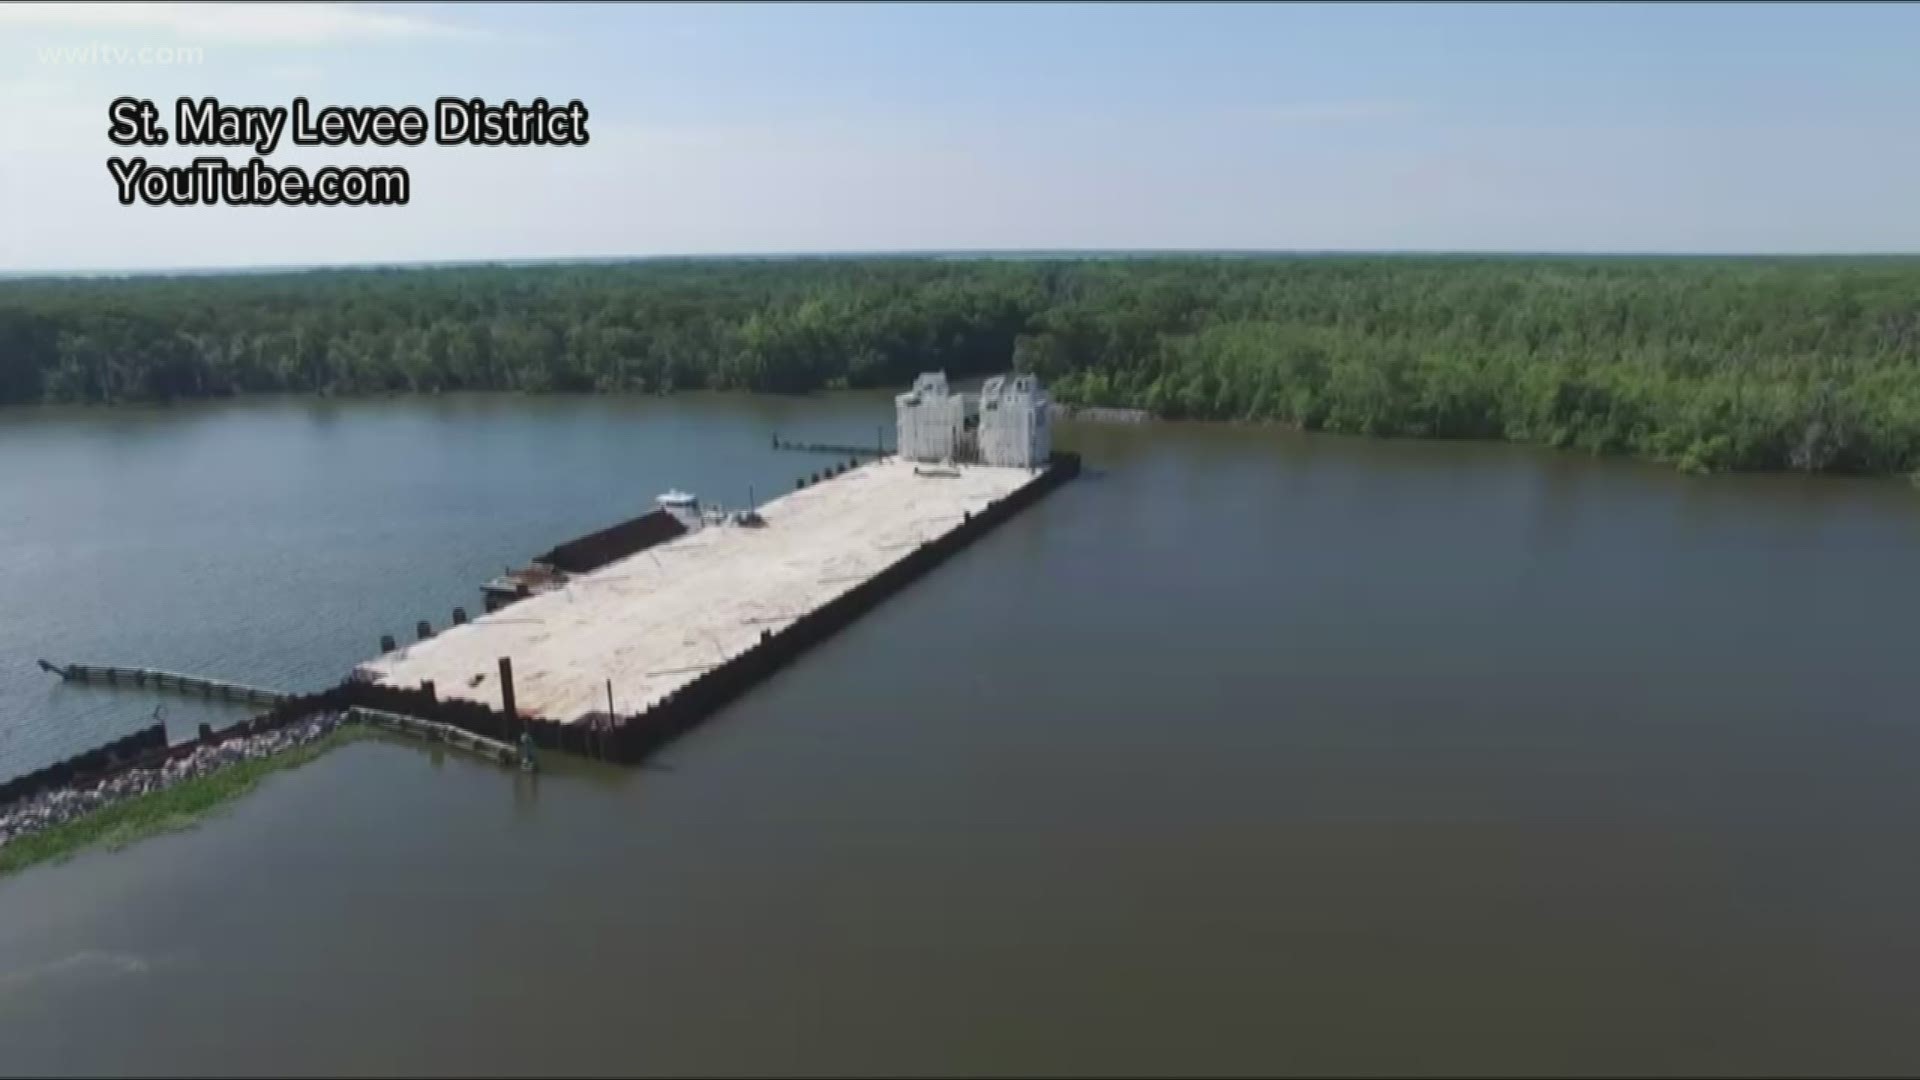 "If they do not put a barge in Bayou Chene, some homes will flood."